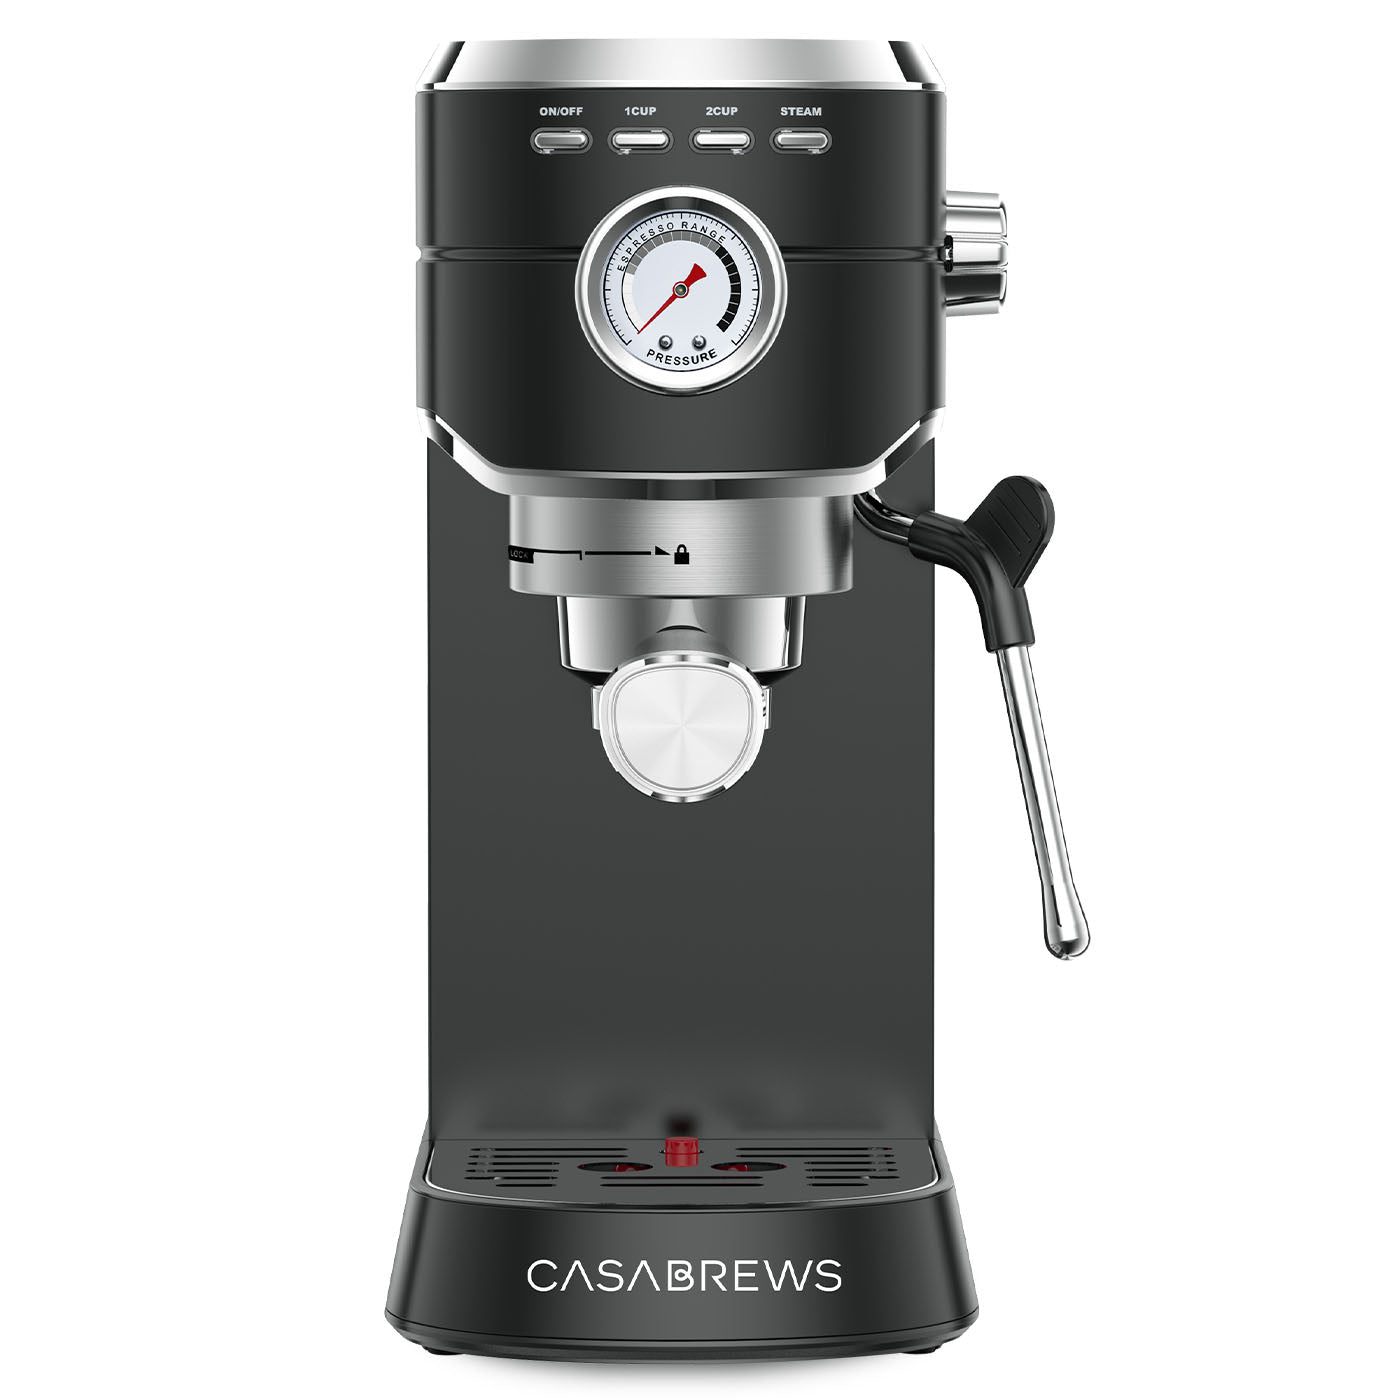 CASABREWS CM5418 Compact 20-Bar Espresso Machine with Stainless Steel Milk Frother